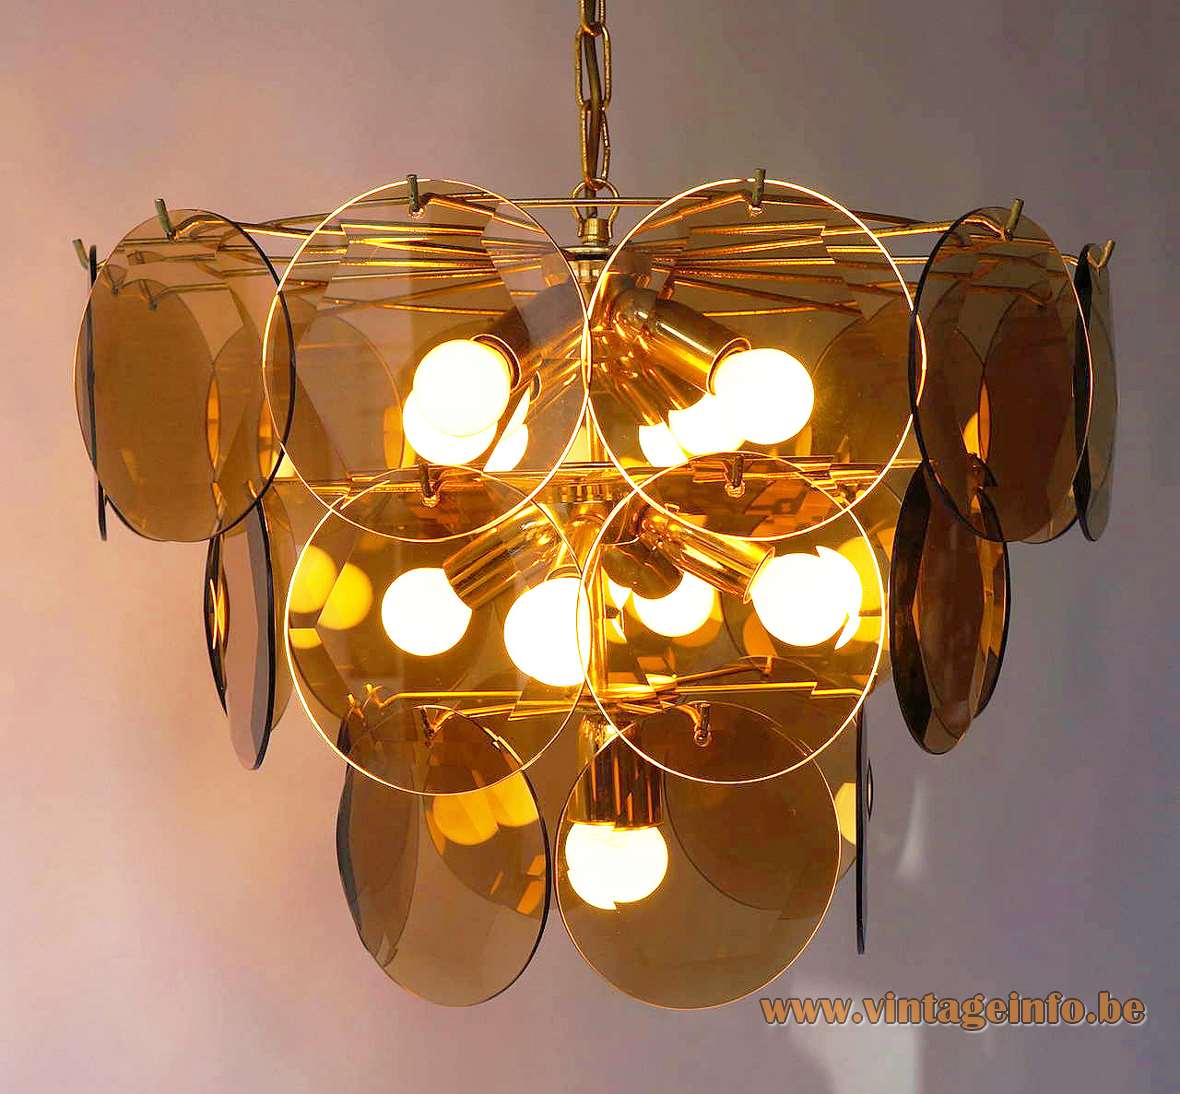 1970s cut glass discs chandelier 27 smoked dishes facet-cut brass wire frame ORION Austria 1980s